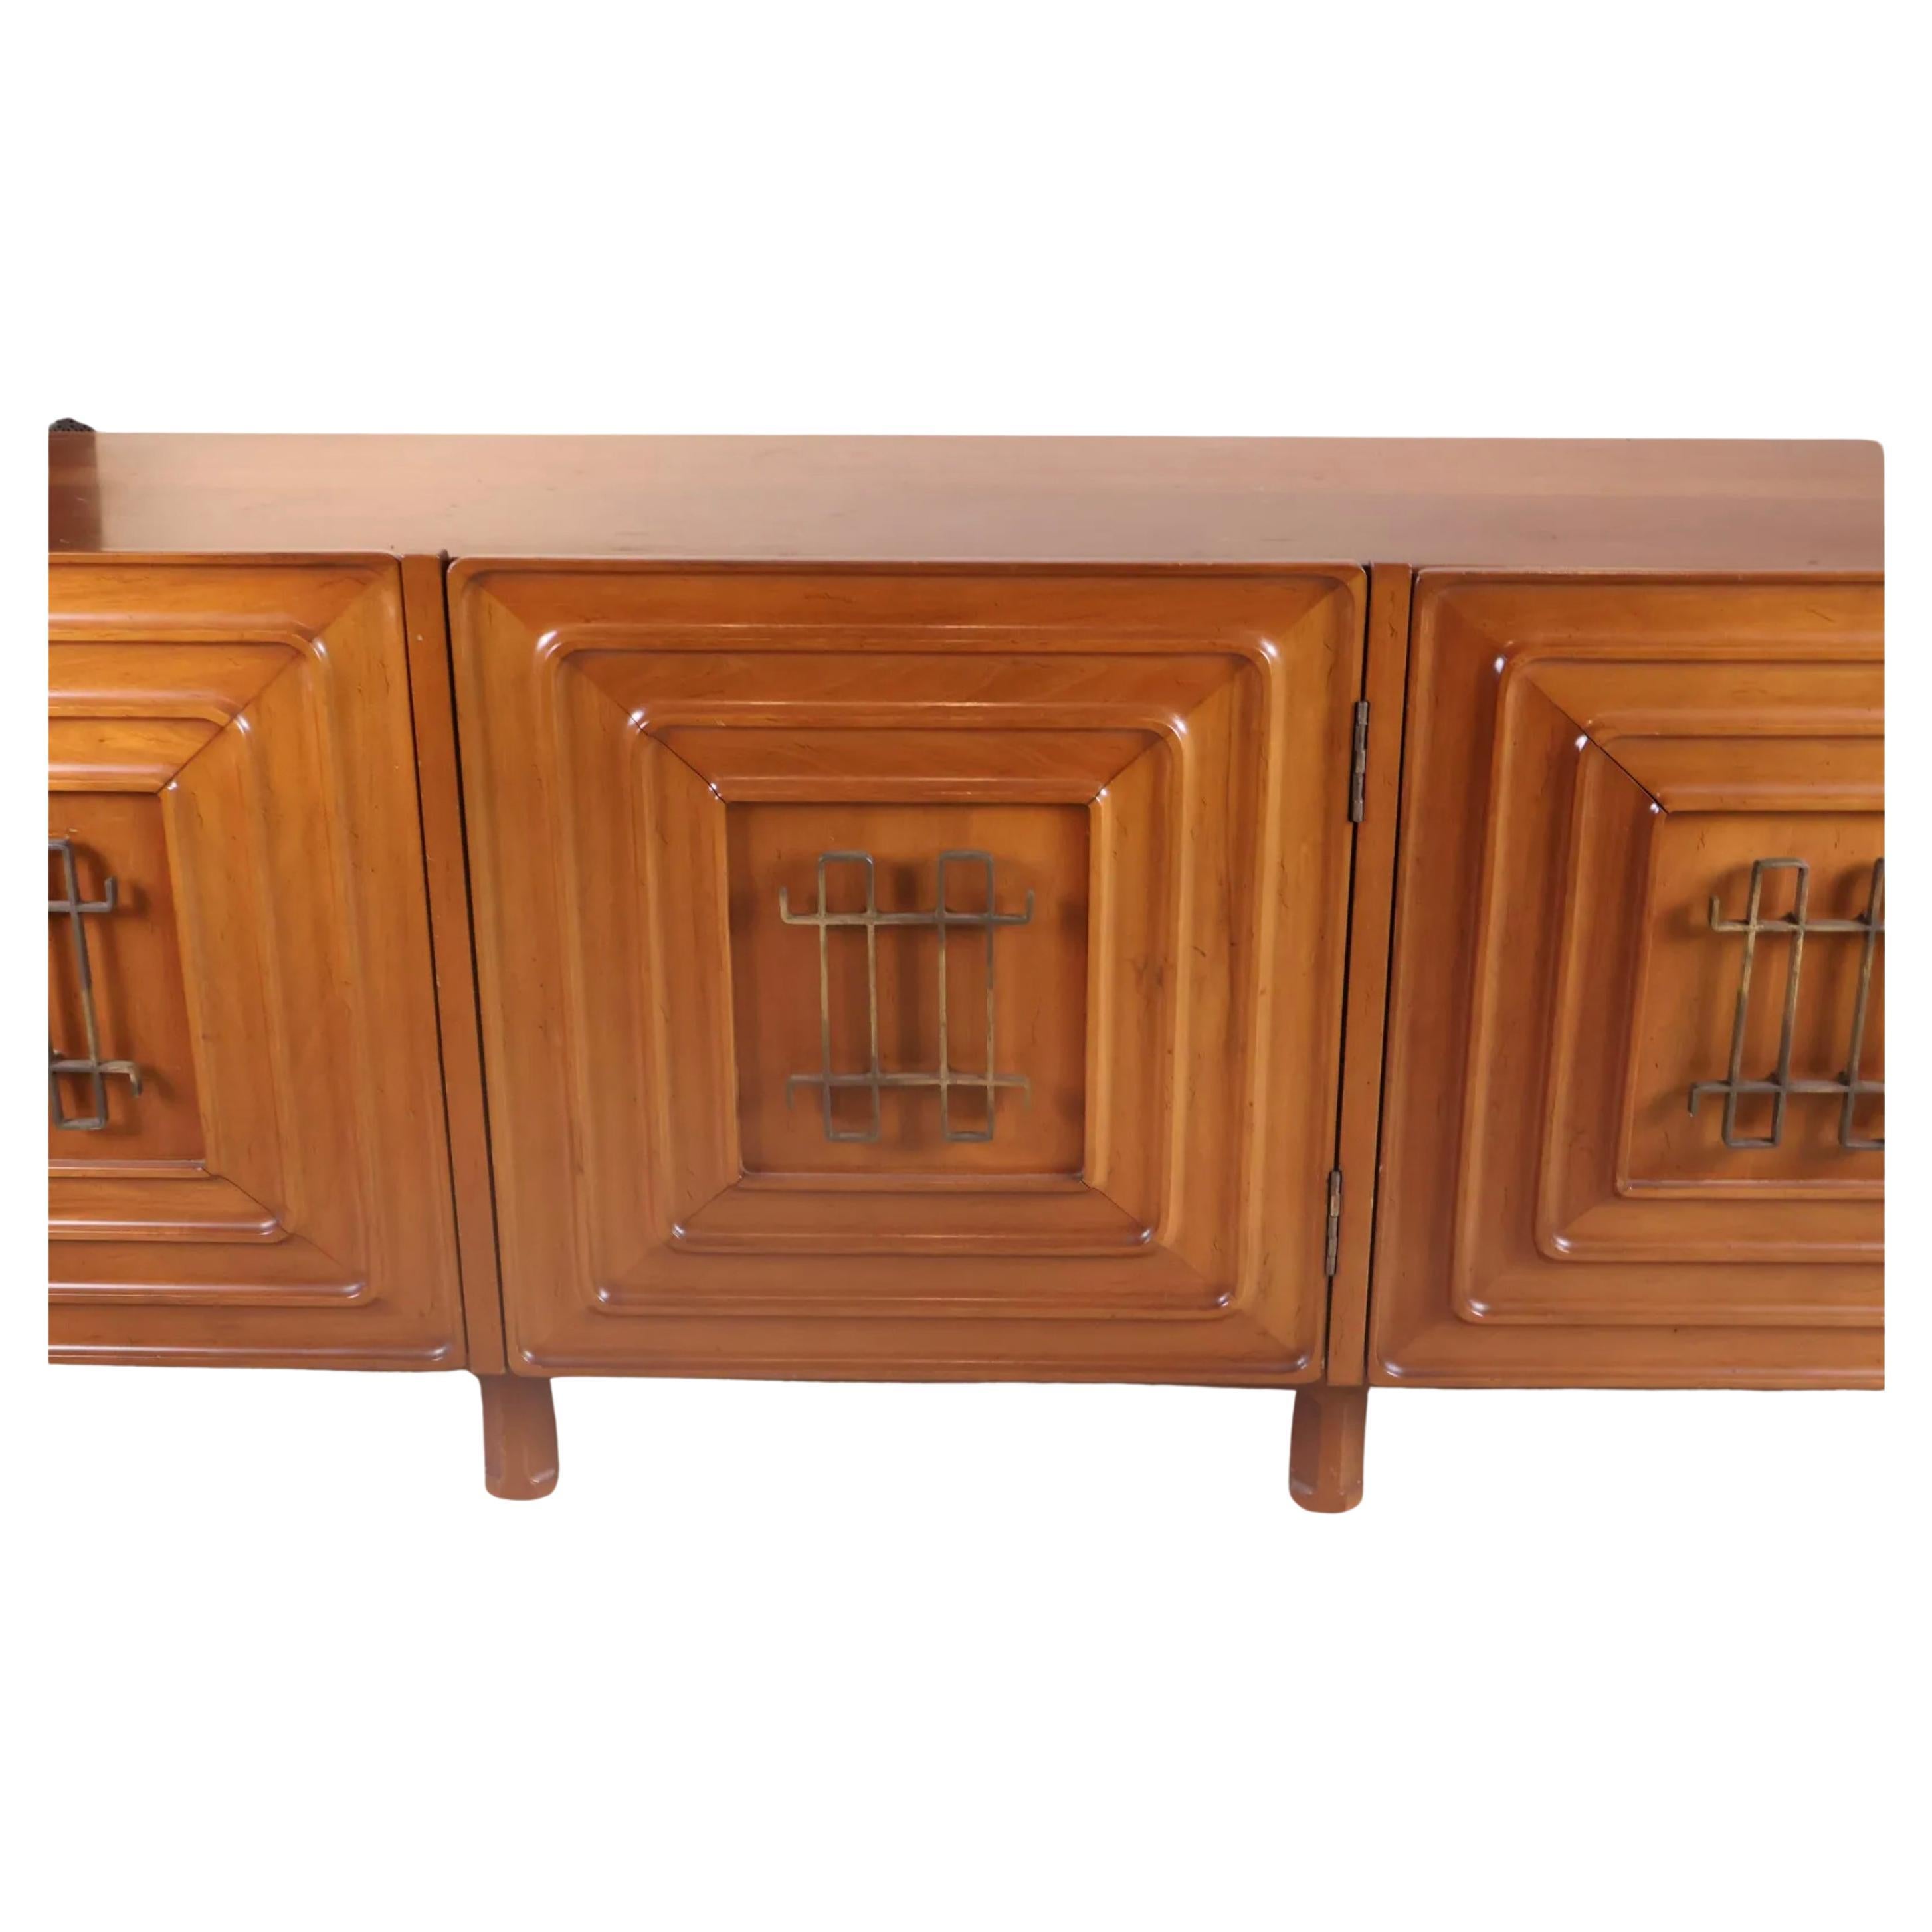 Mid-Century Modern Exquisite Credenza by Edmond J. Spence made by Industria Mueblera Mexico For Sale